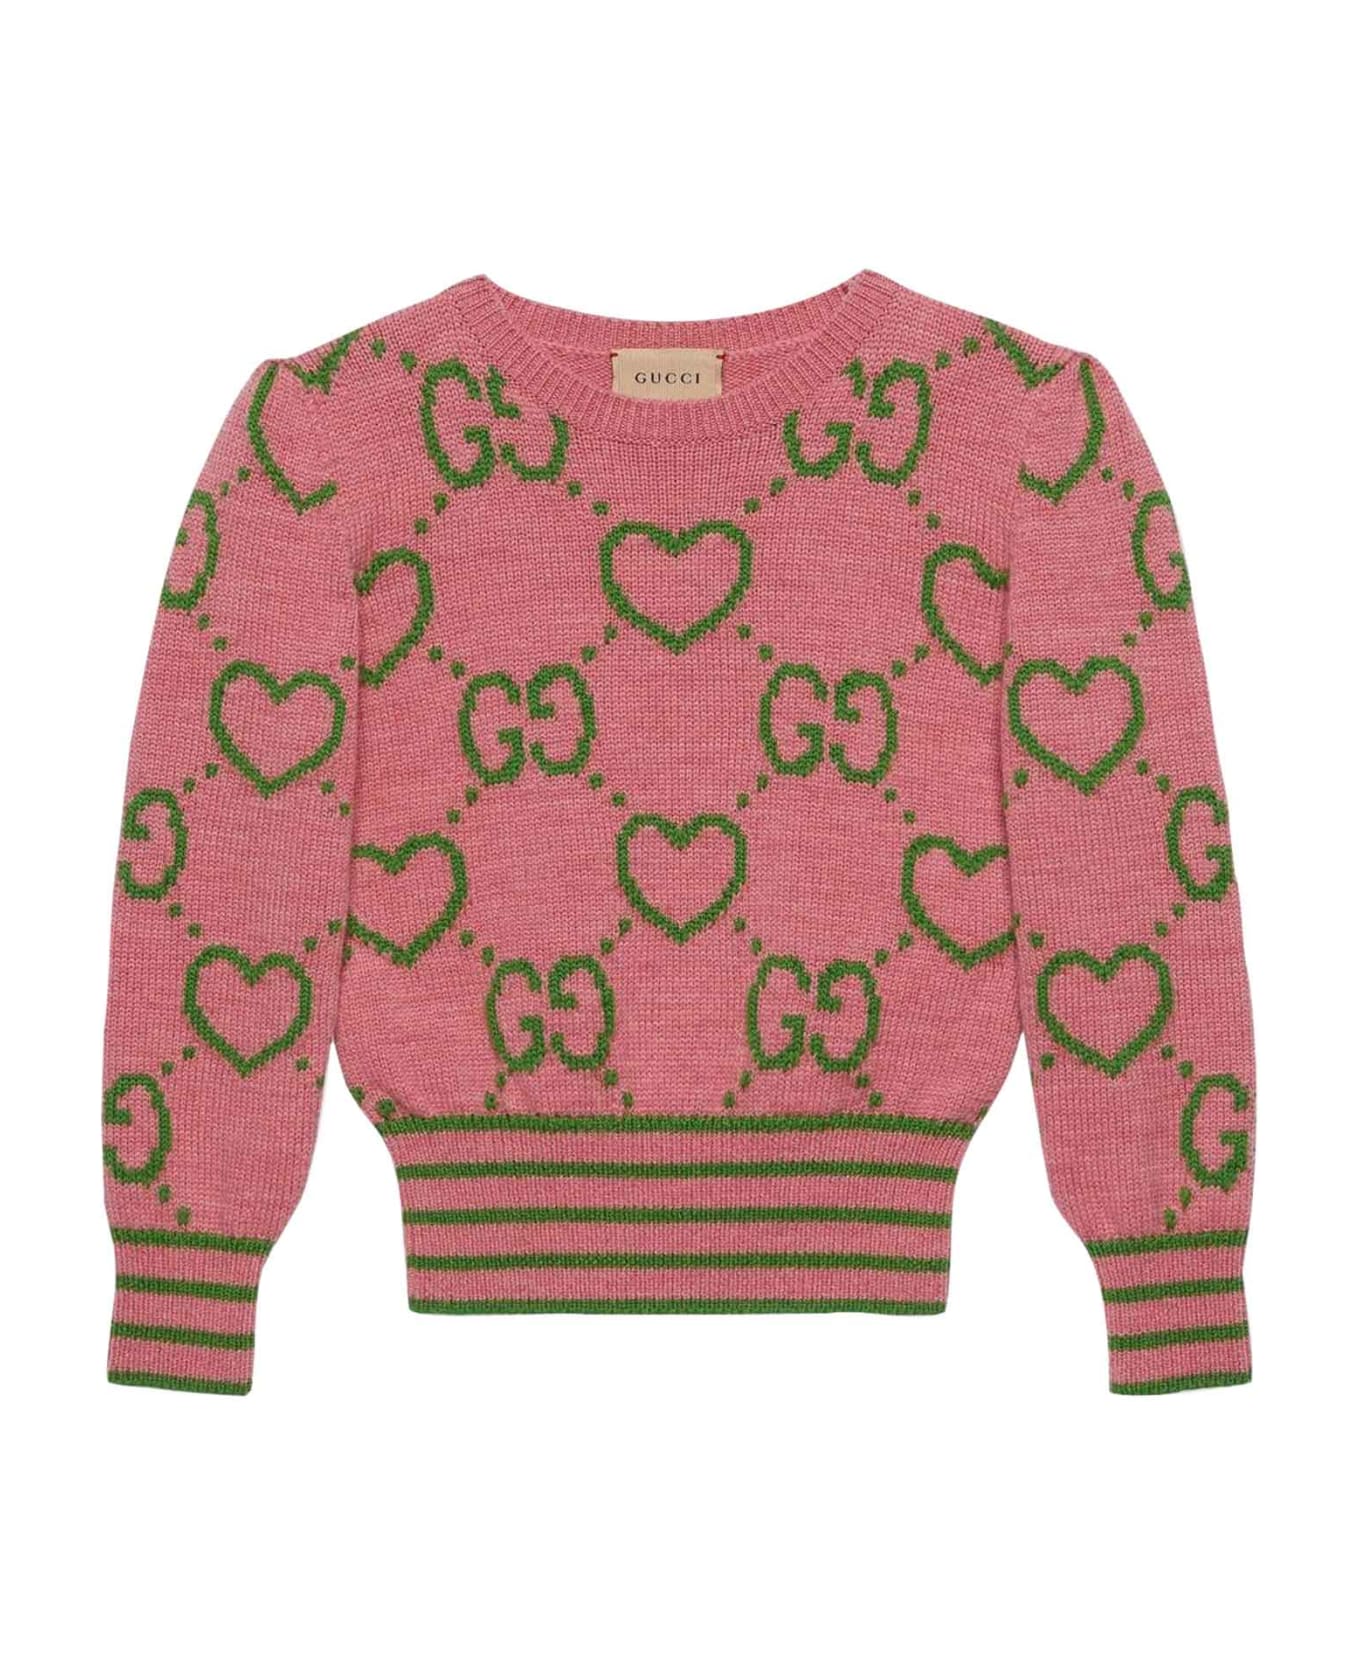 Gucci Pink Sweater Girl - Rosa/verde